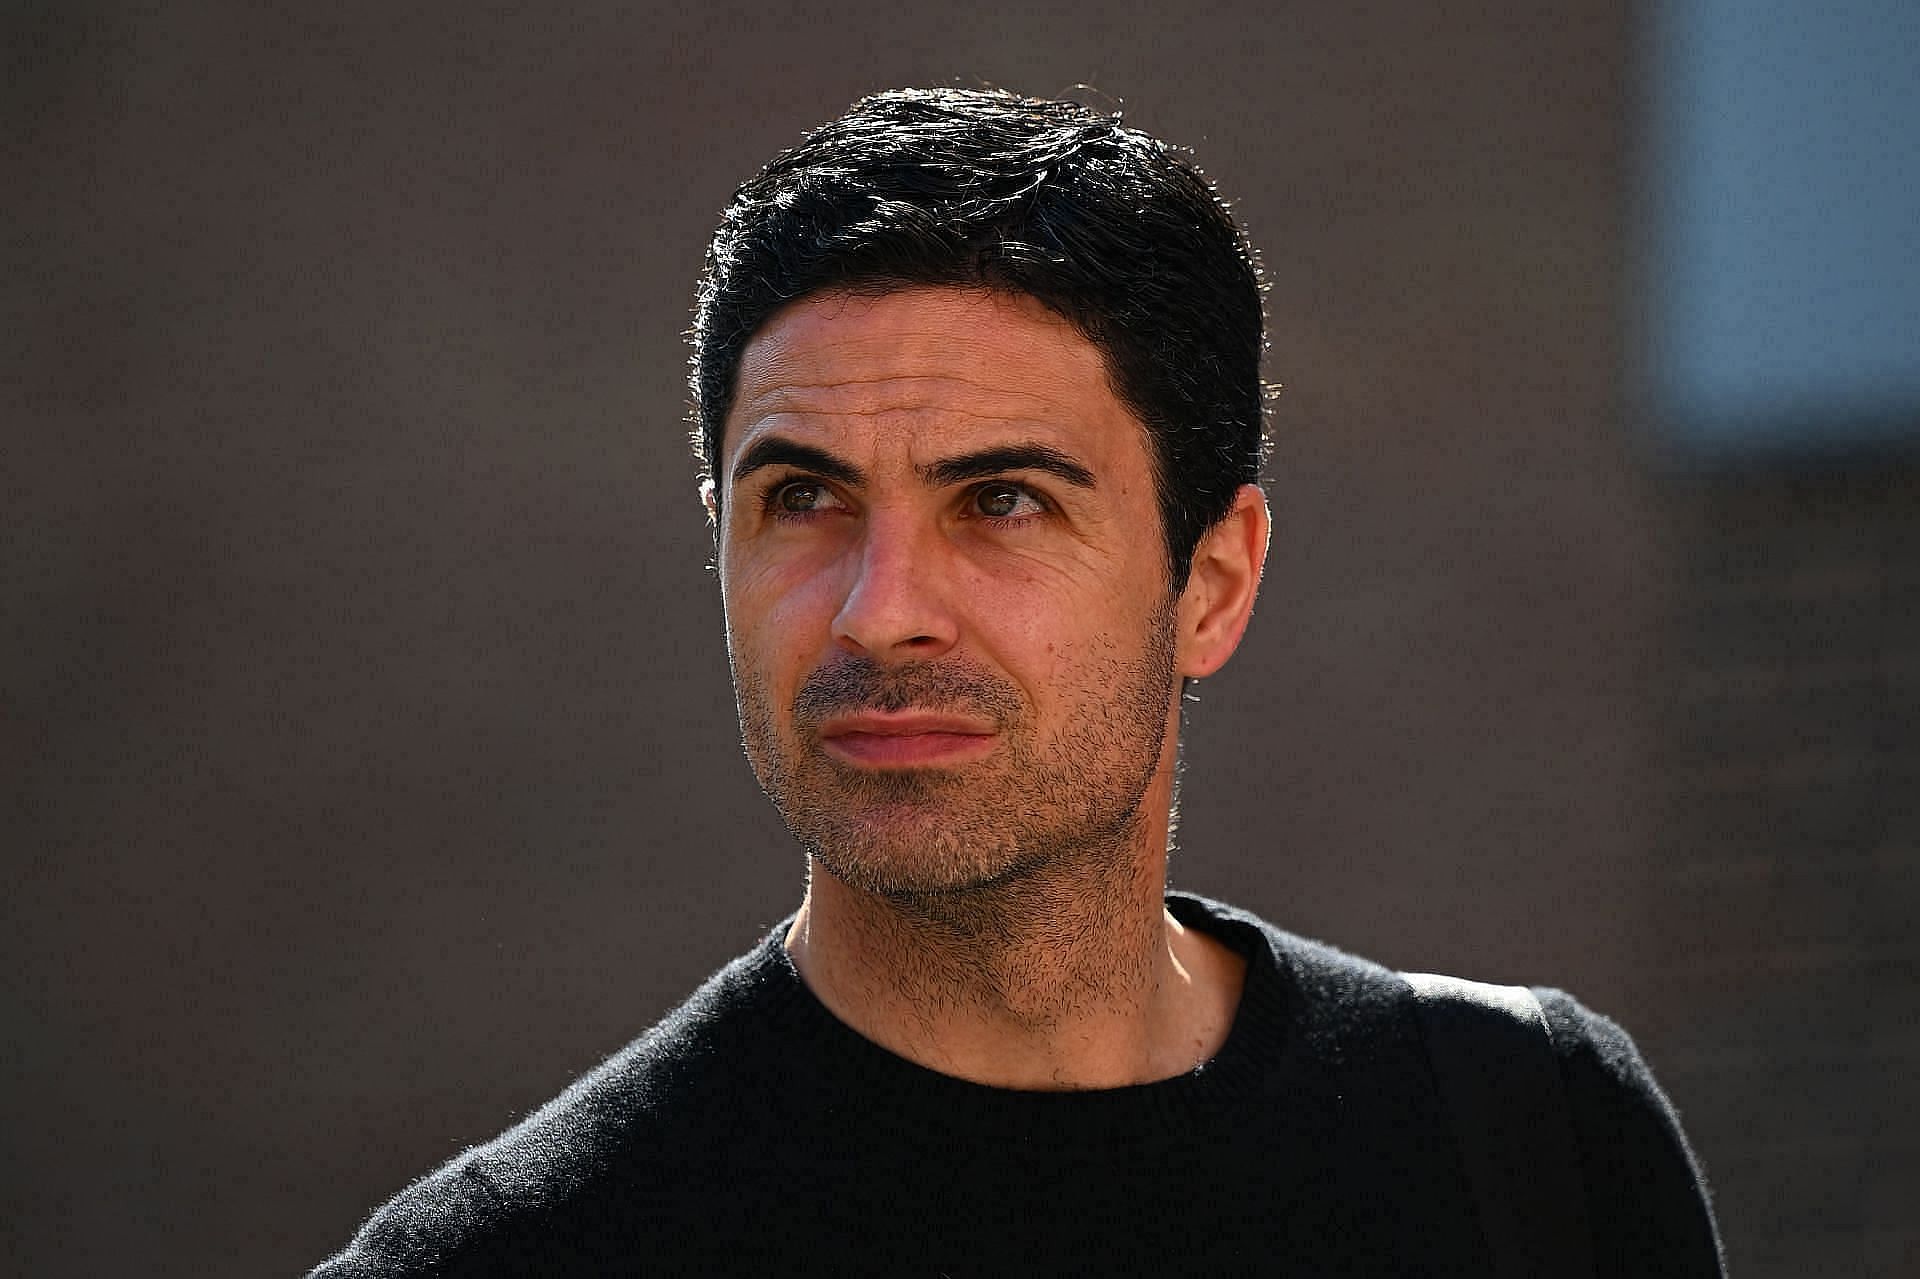 Arsenal manager Mikel Arteta is planning for the upcoming season